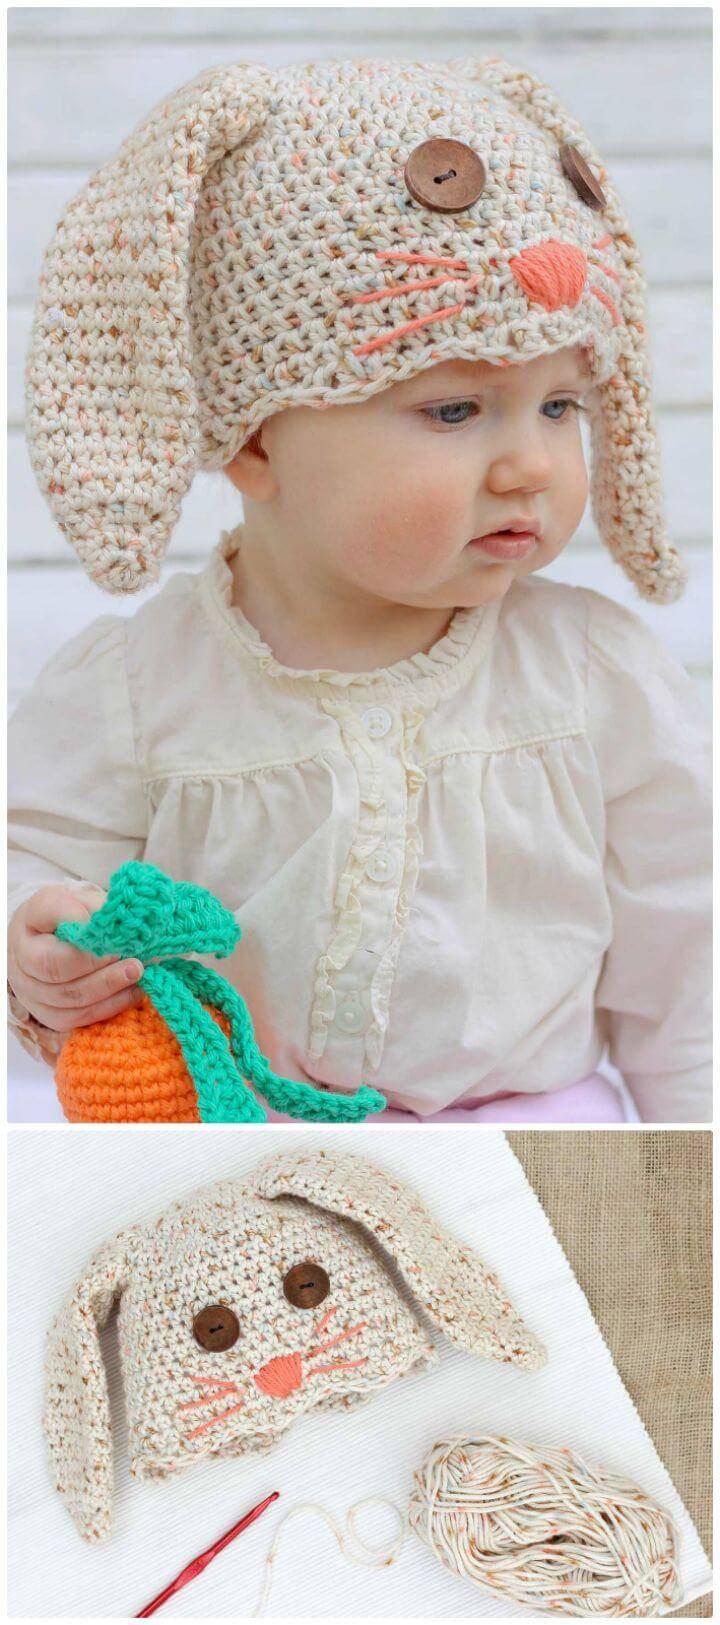 How To Crochet Bunny Hat - Free Pattern For Newborn-Toddler